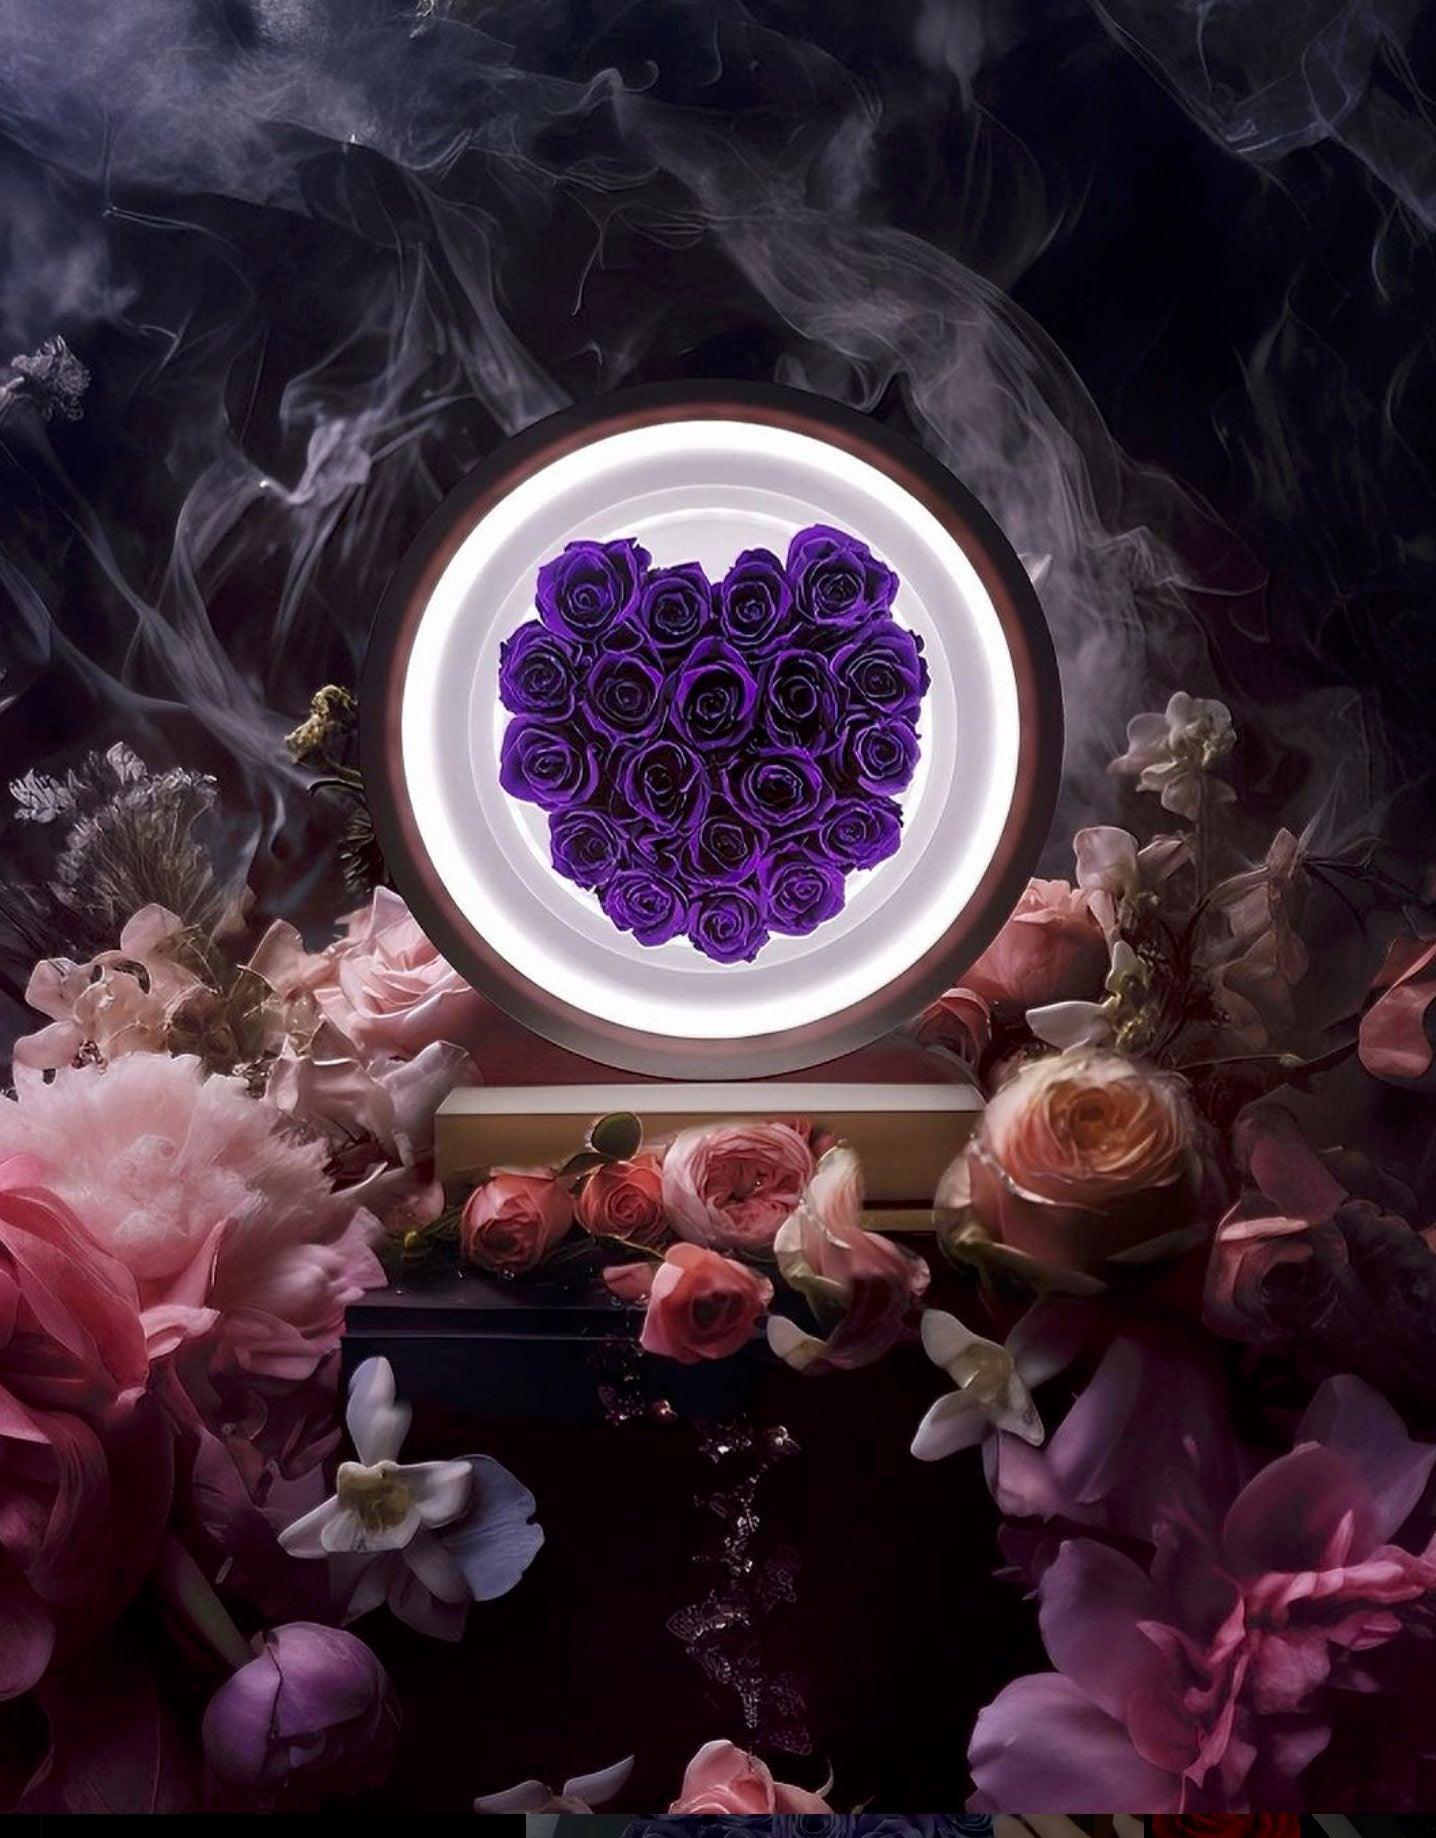 Forever Rose Flower Lamp Collection - Imaginary Worlds